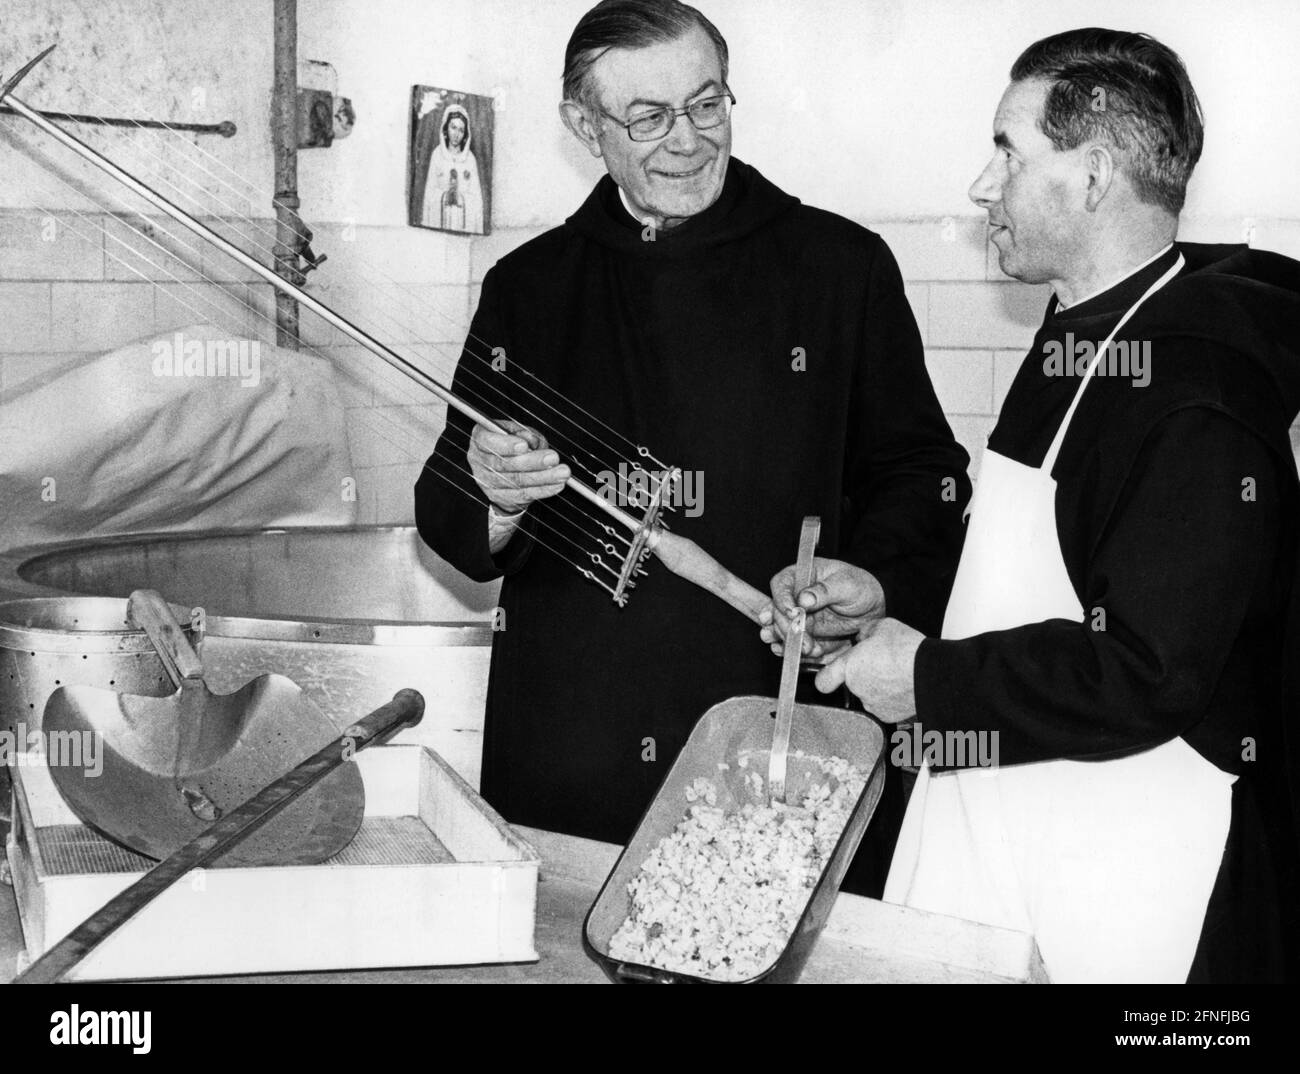 In the monastery of Wessobrunn, which became famous through the Wessobrunn prayer, the cheese culture was continued. Together with Superior Father Gilbert (left), Frater Adalrich, as a trained cheese maker, checks a typical Lenten food, Kässpatz'n. Gilbert holds the cheese harve with which the curds were cut in the cheese dairy. [automated translation] Stock Photo